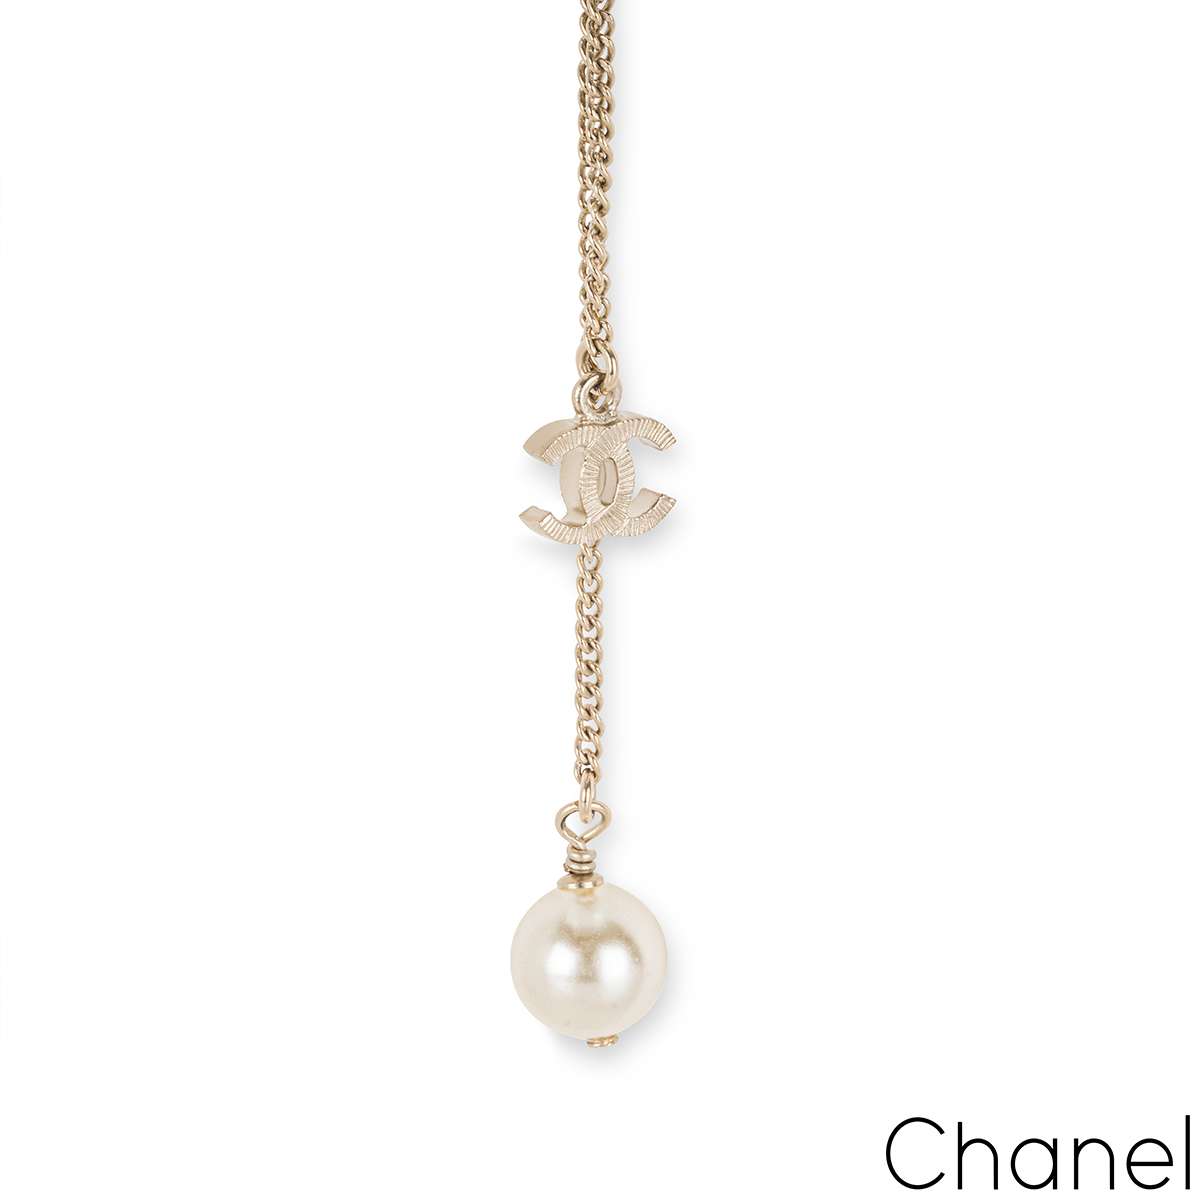 Chanel Faux Pearl & Glass Bead CC Necklace